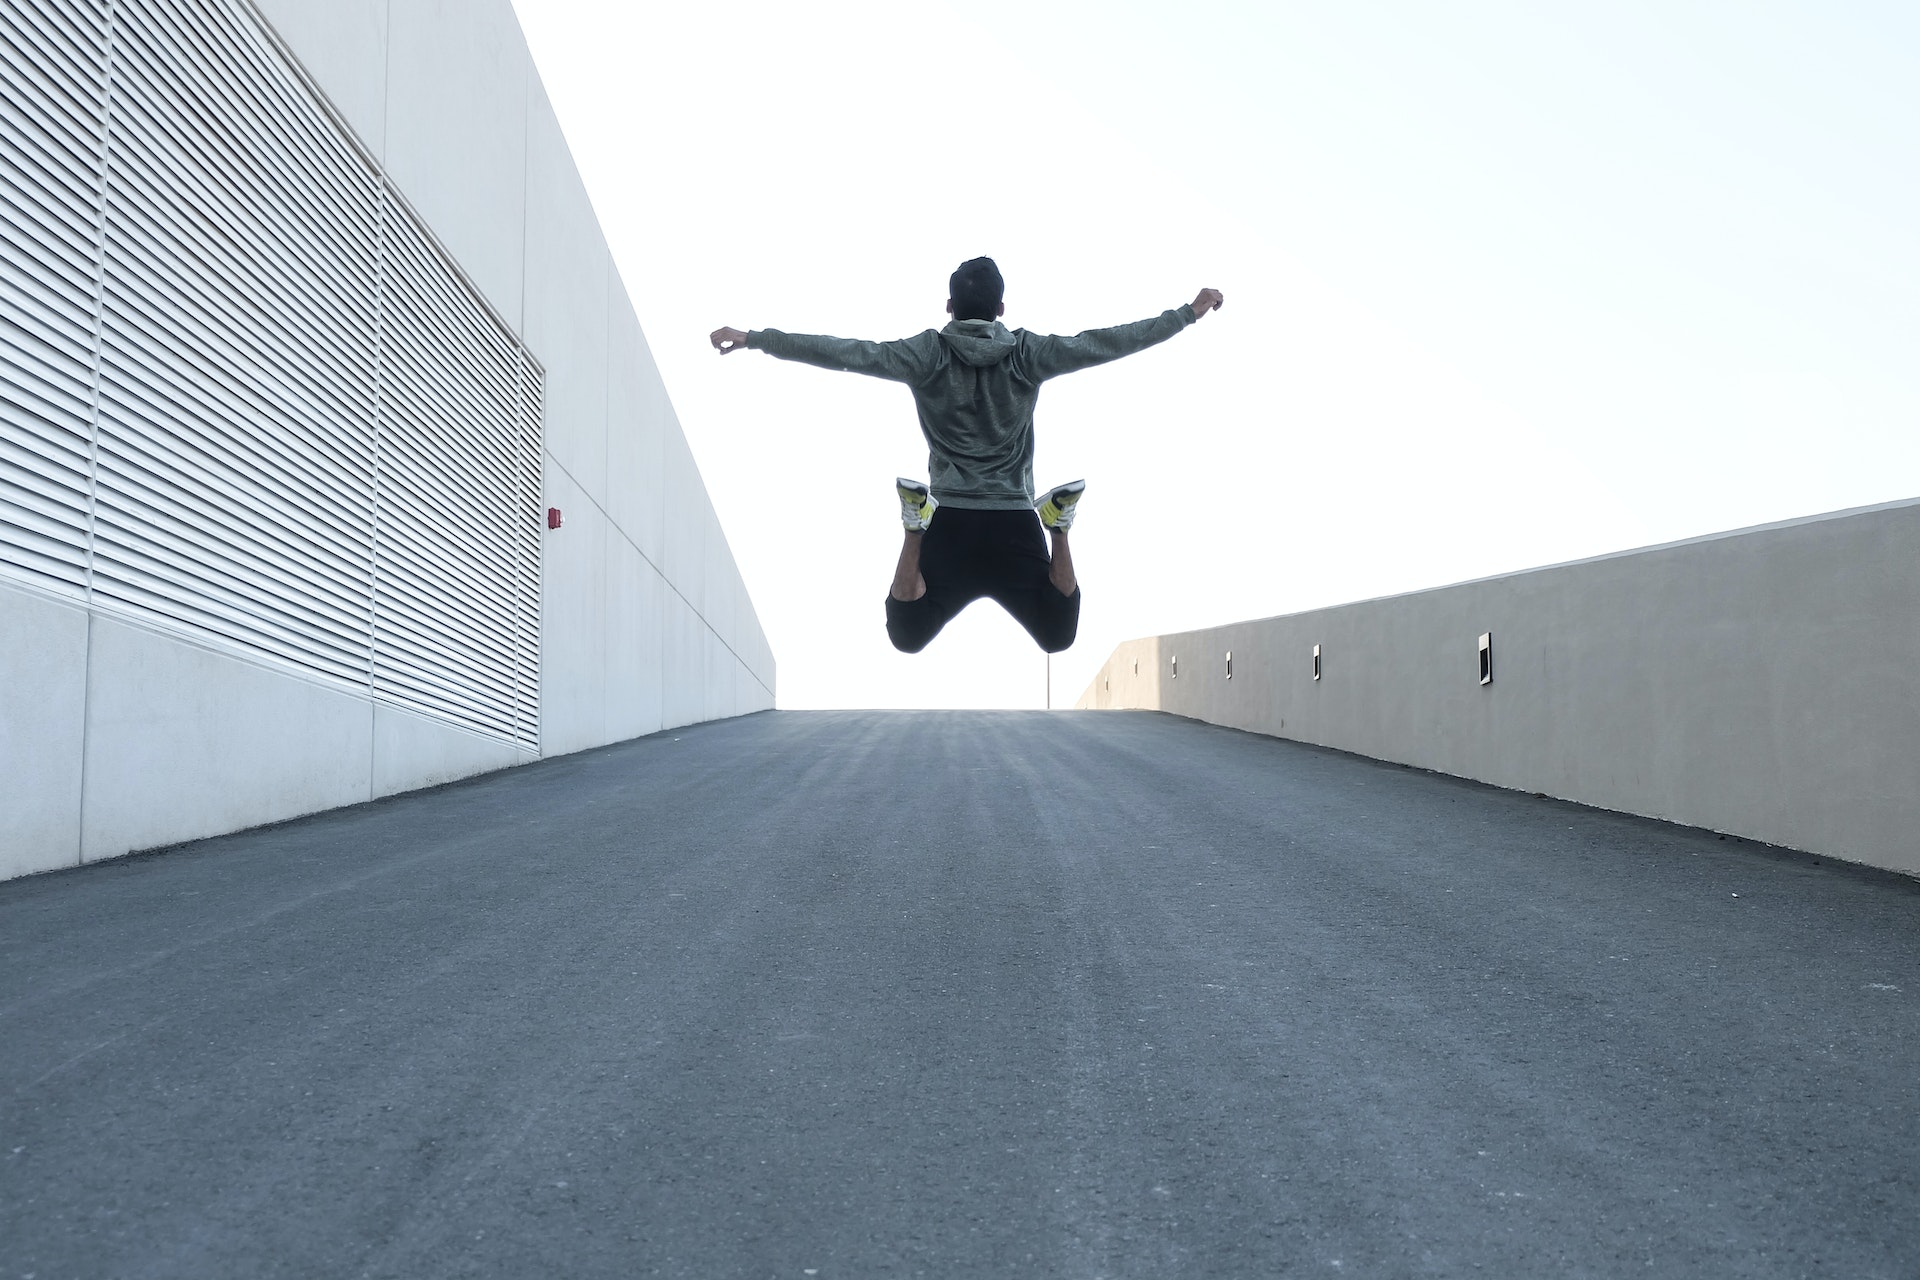 A man jumps in the air with open arms | Source: Pexels